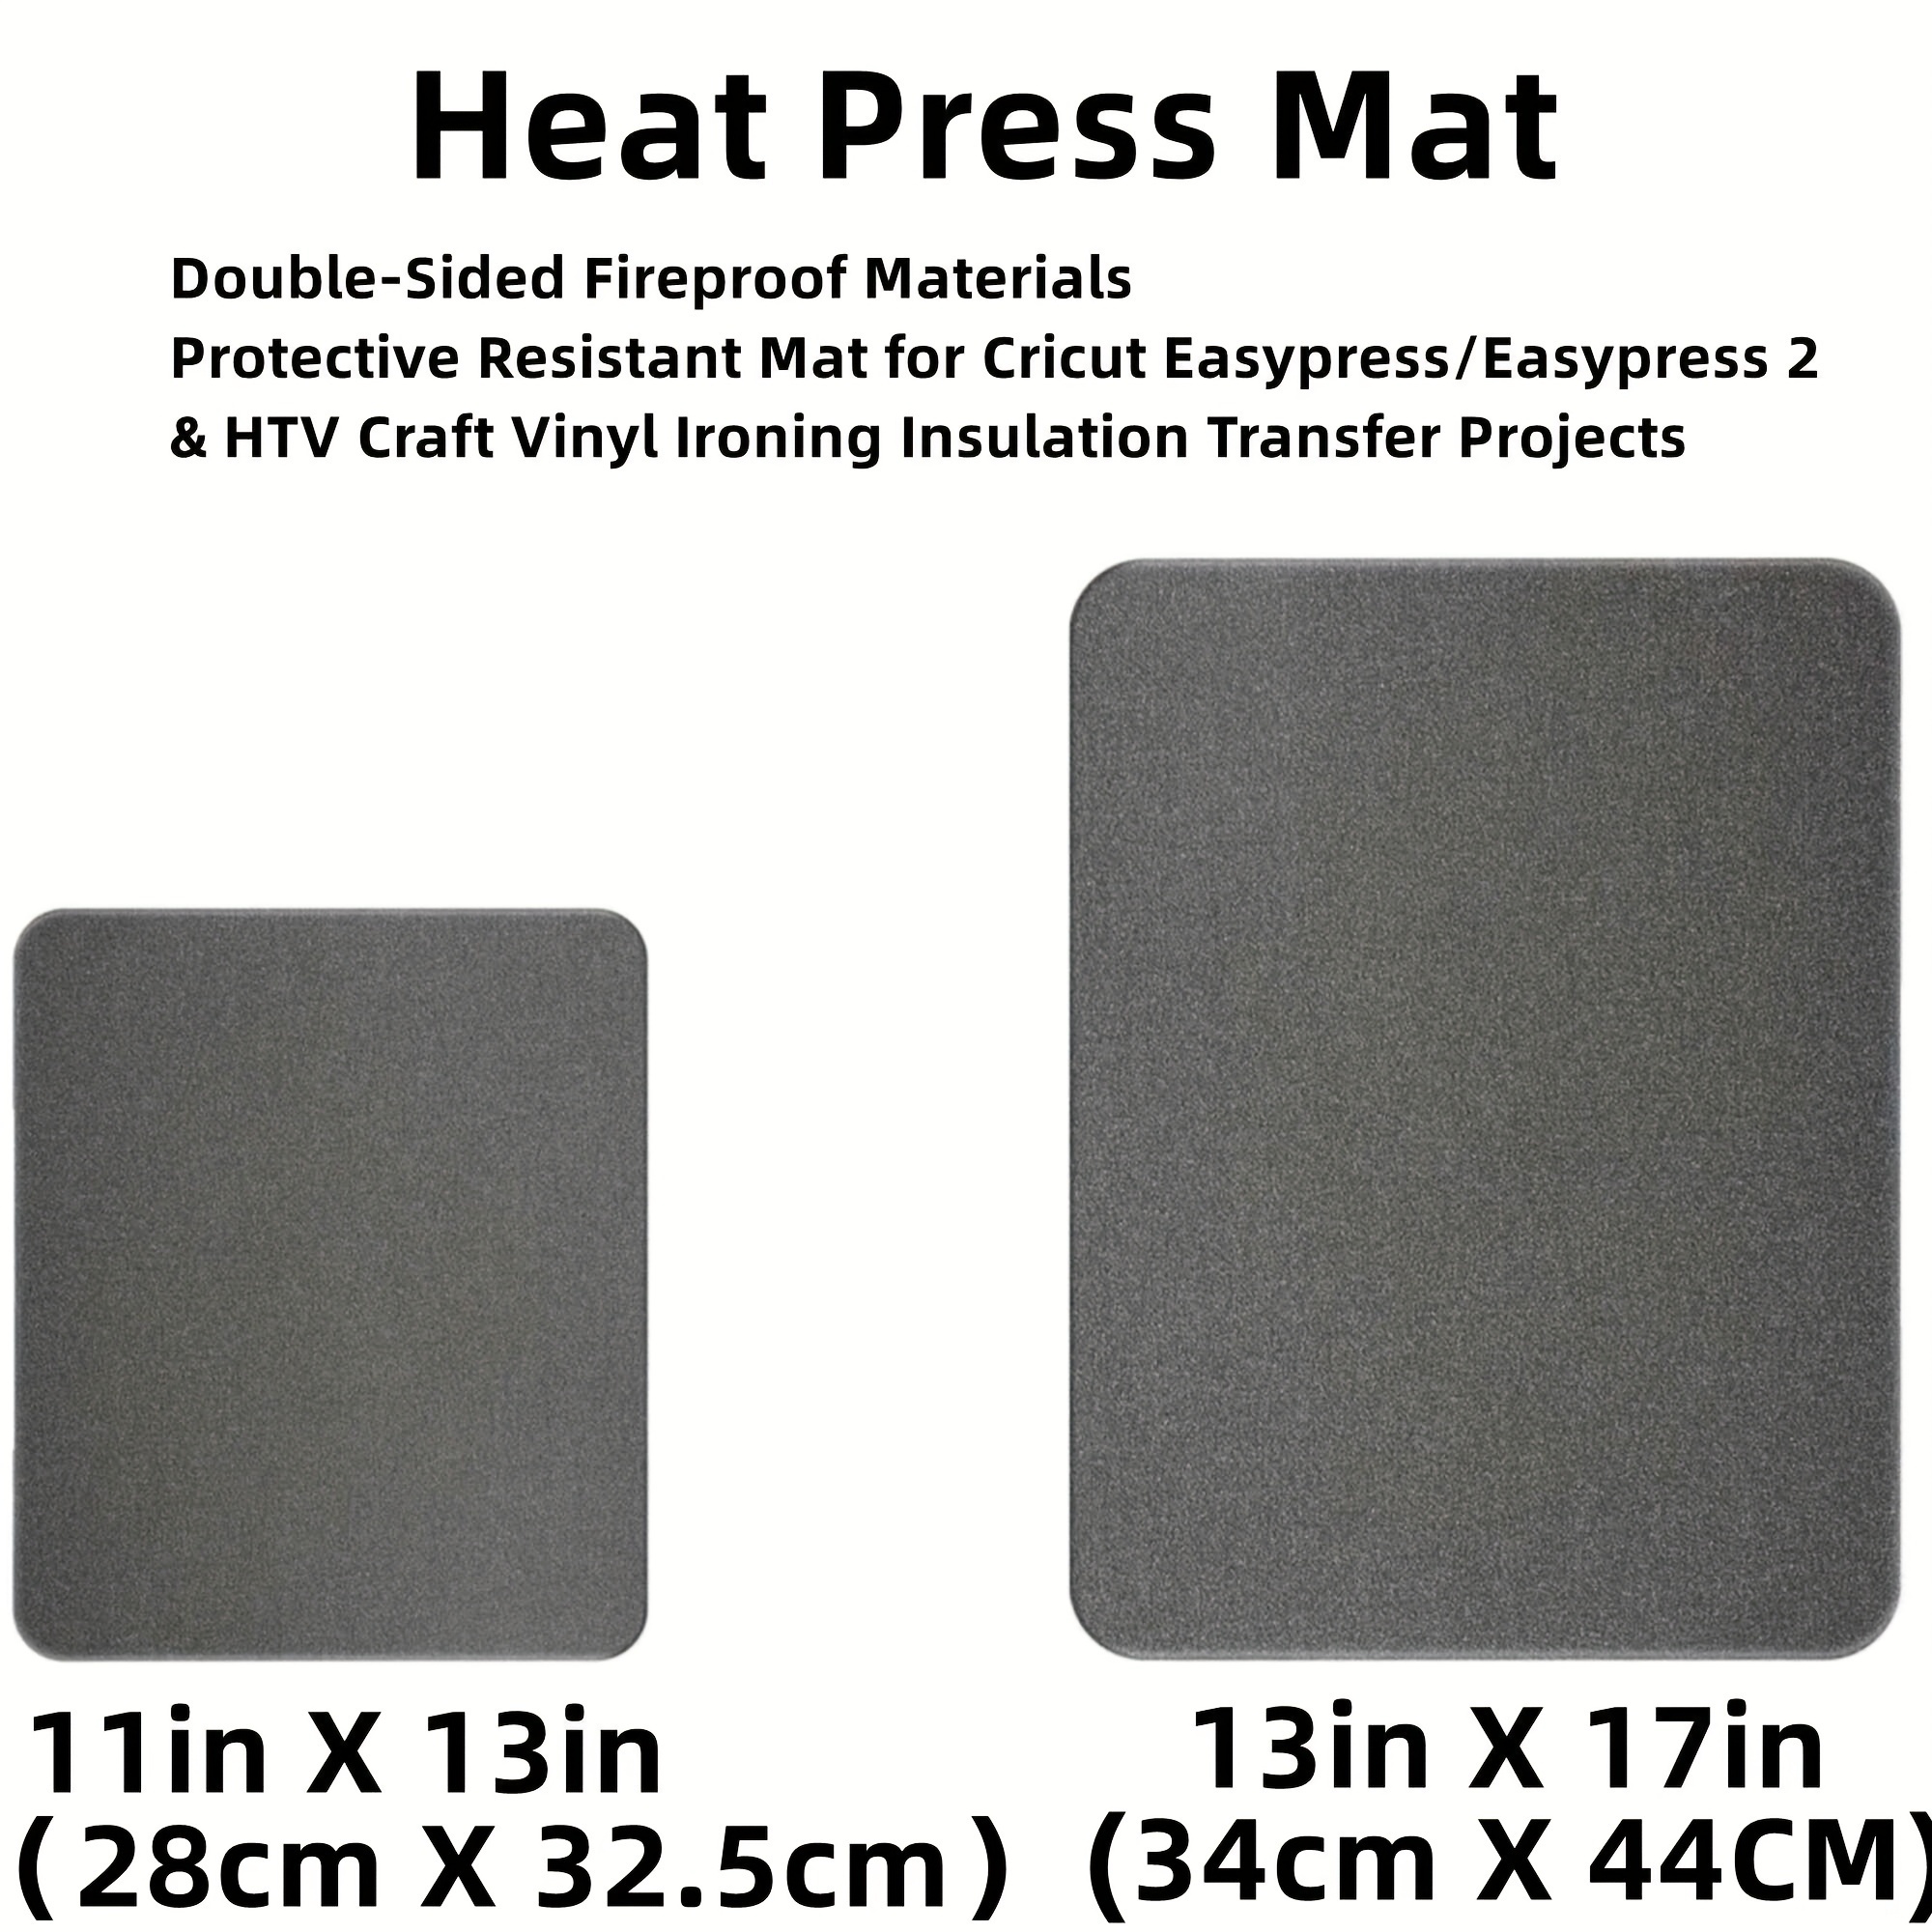 12in x 7.8in Easy Press Protective Resistant Mat Pad for Cricut